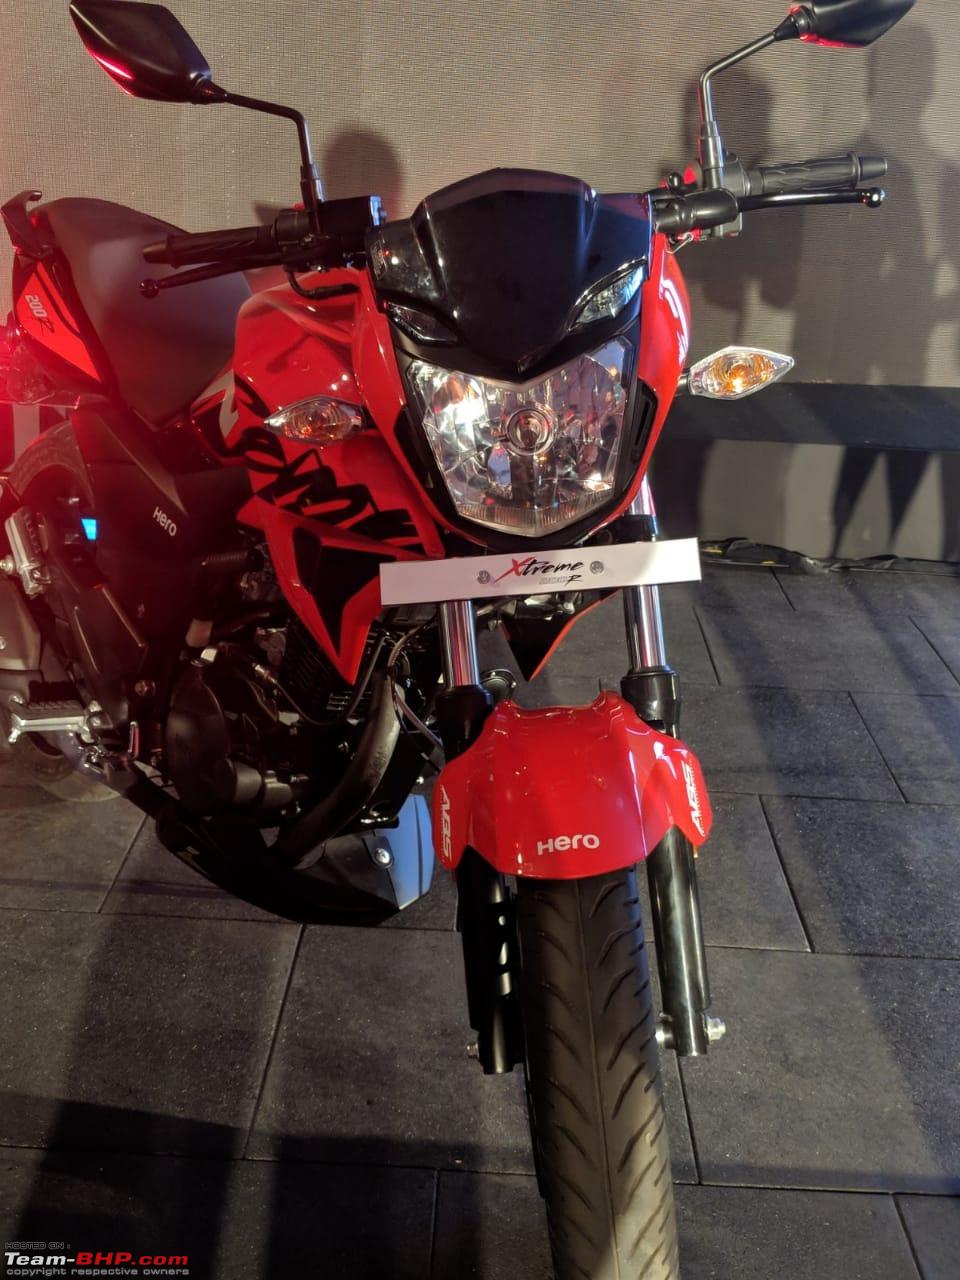 Hero Xtreme 200r Launched At Rs 89 900 Team Bhp